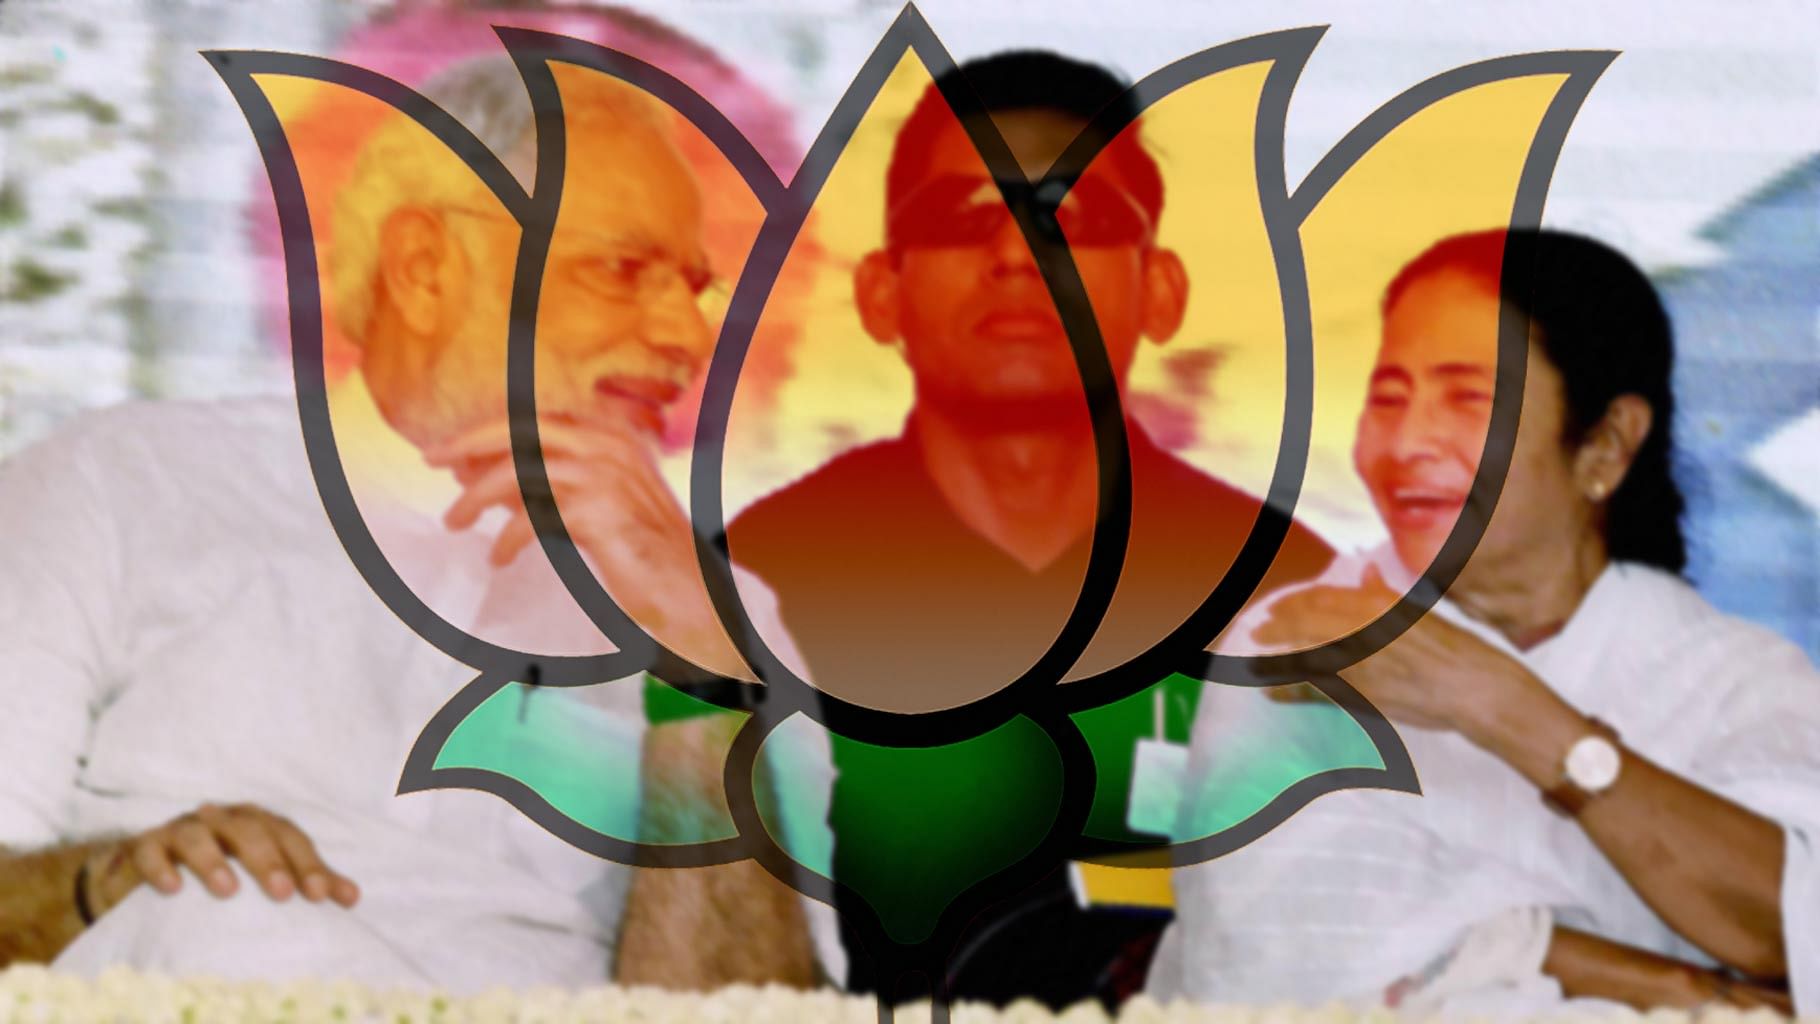 The BJP plans to highlight regional leaders for the upcoming polls in Bengal. (Photo: <b>The Quint</b>)